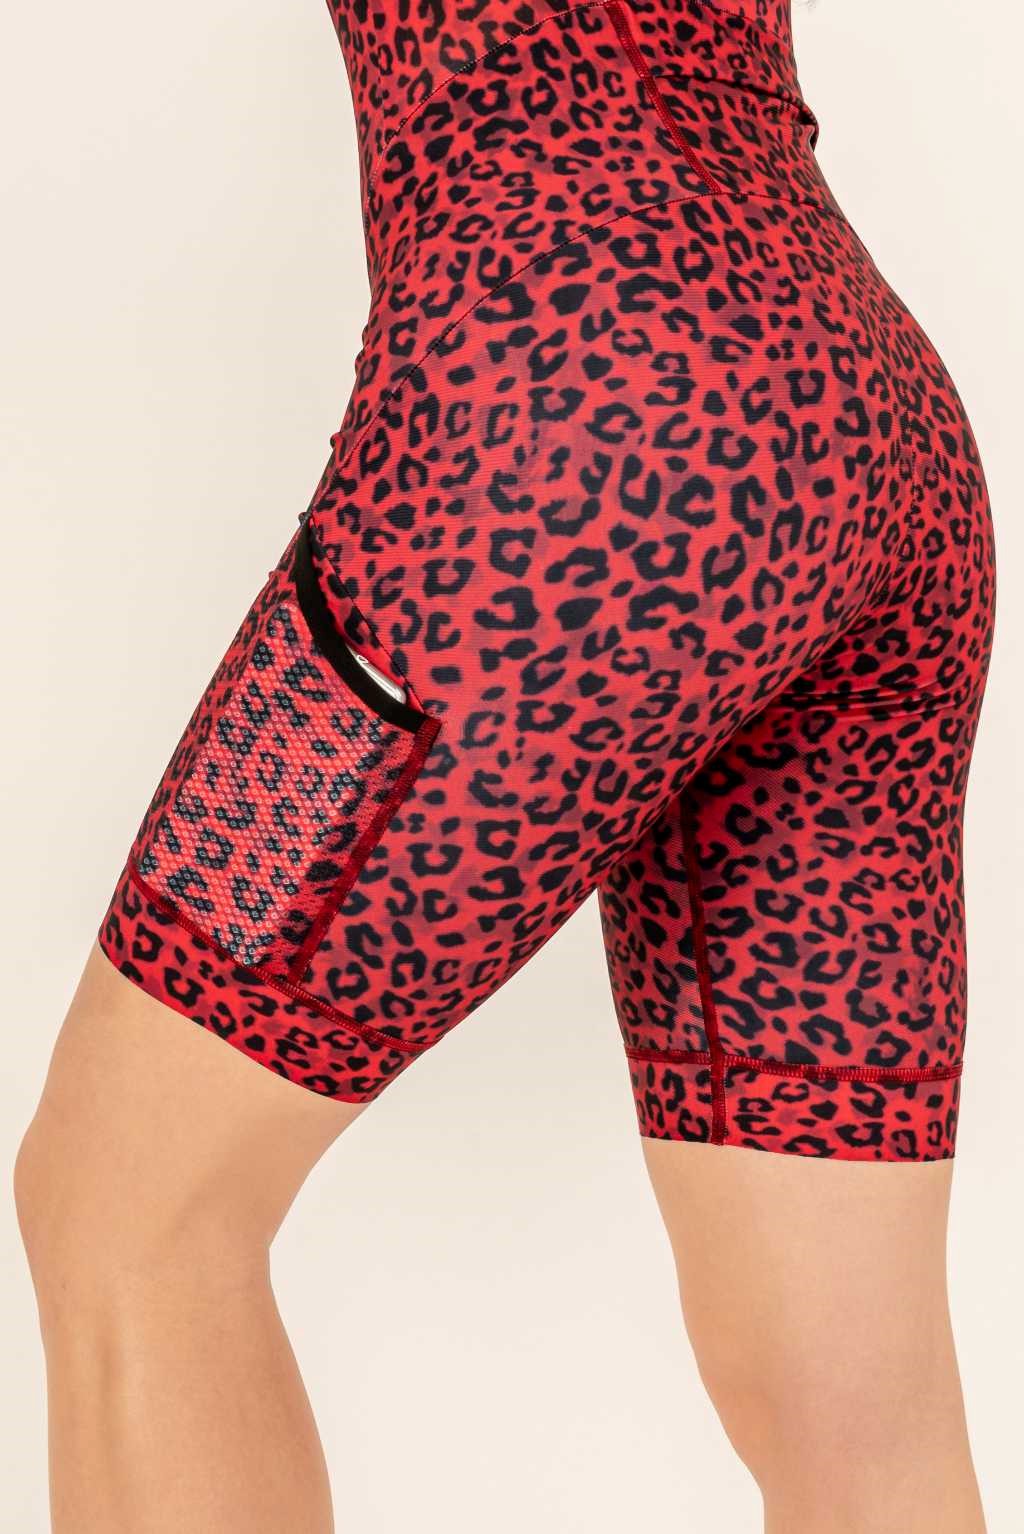 Spacious pockets in a red leopard running skinsuit.